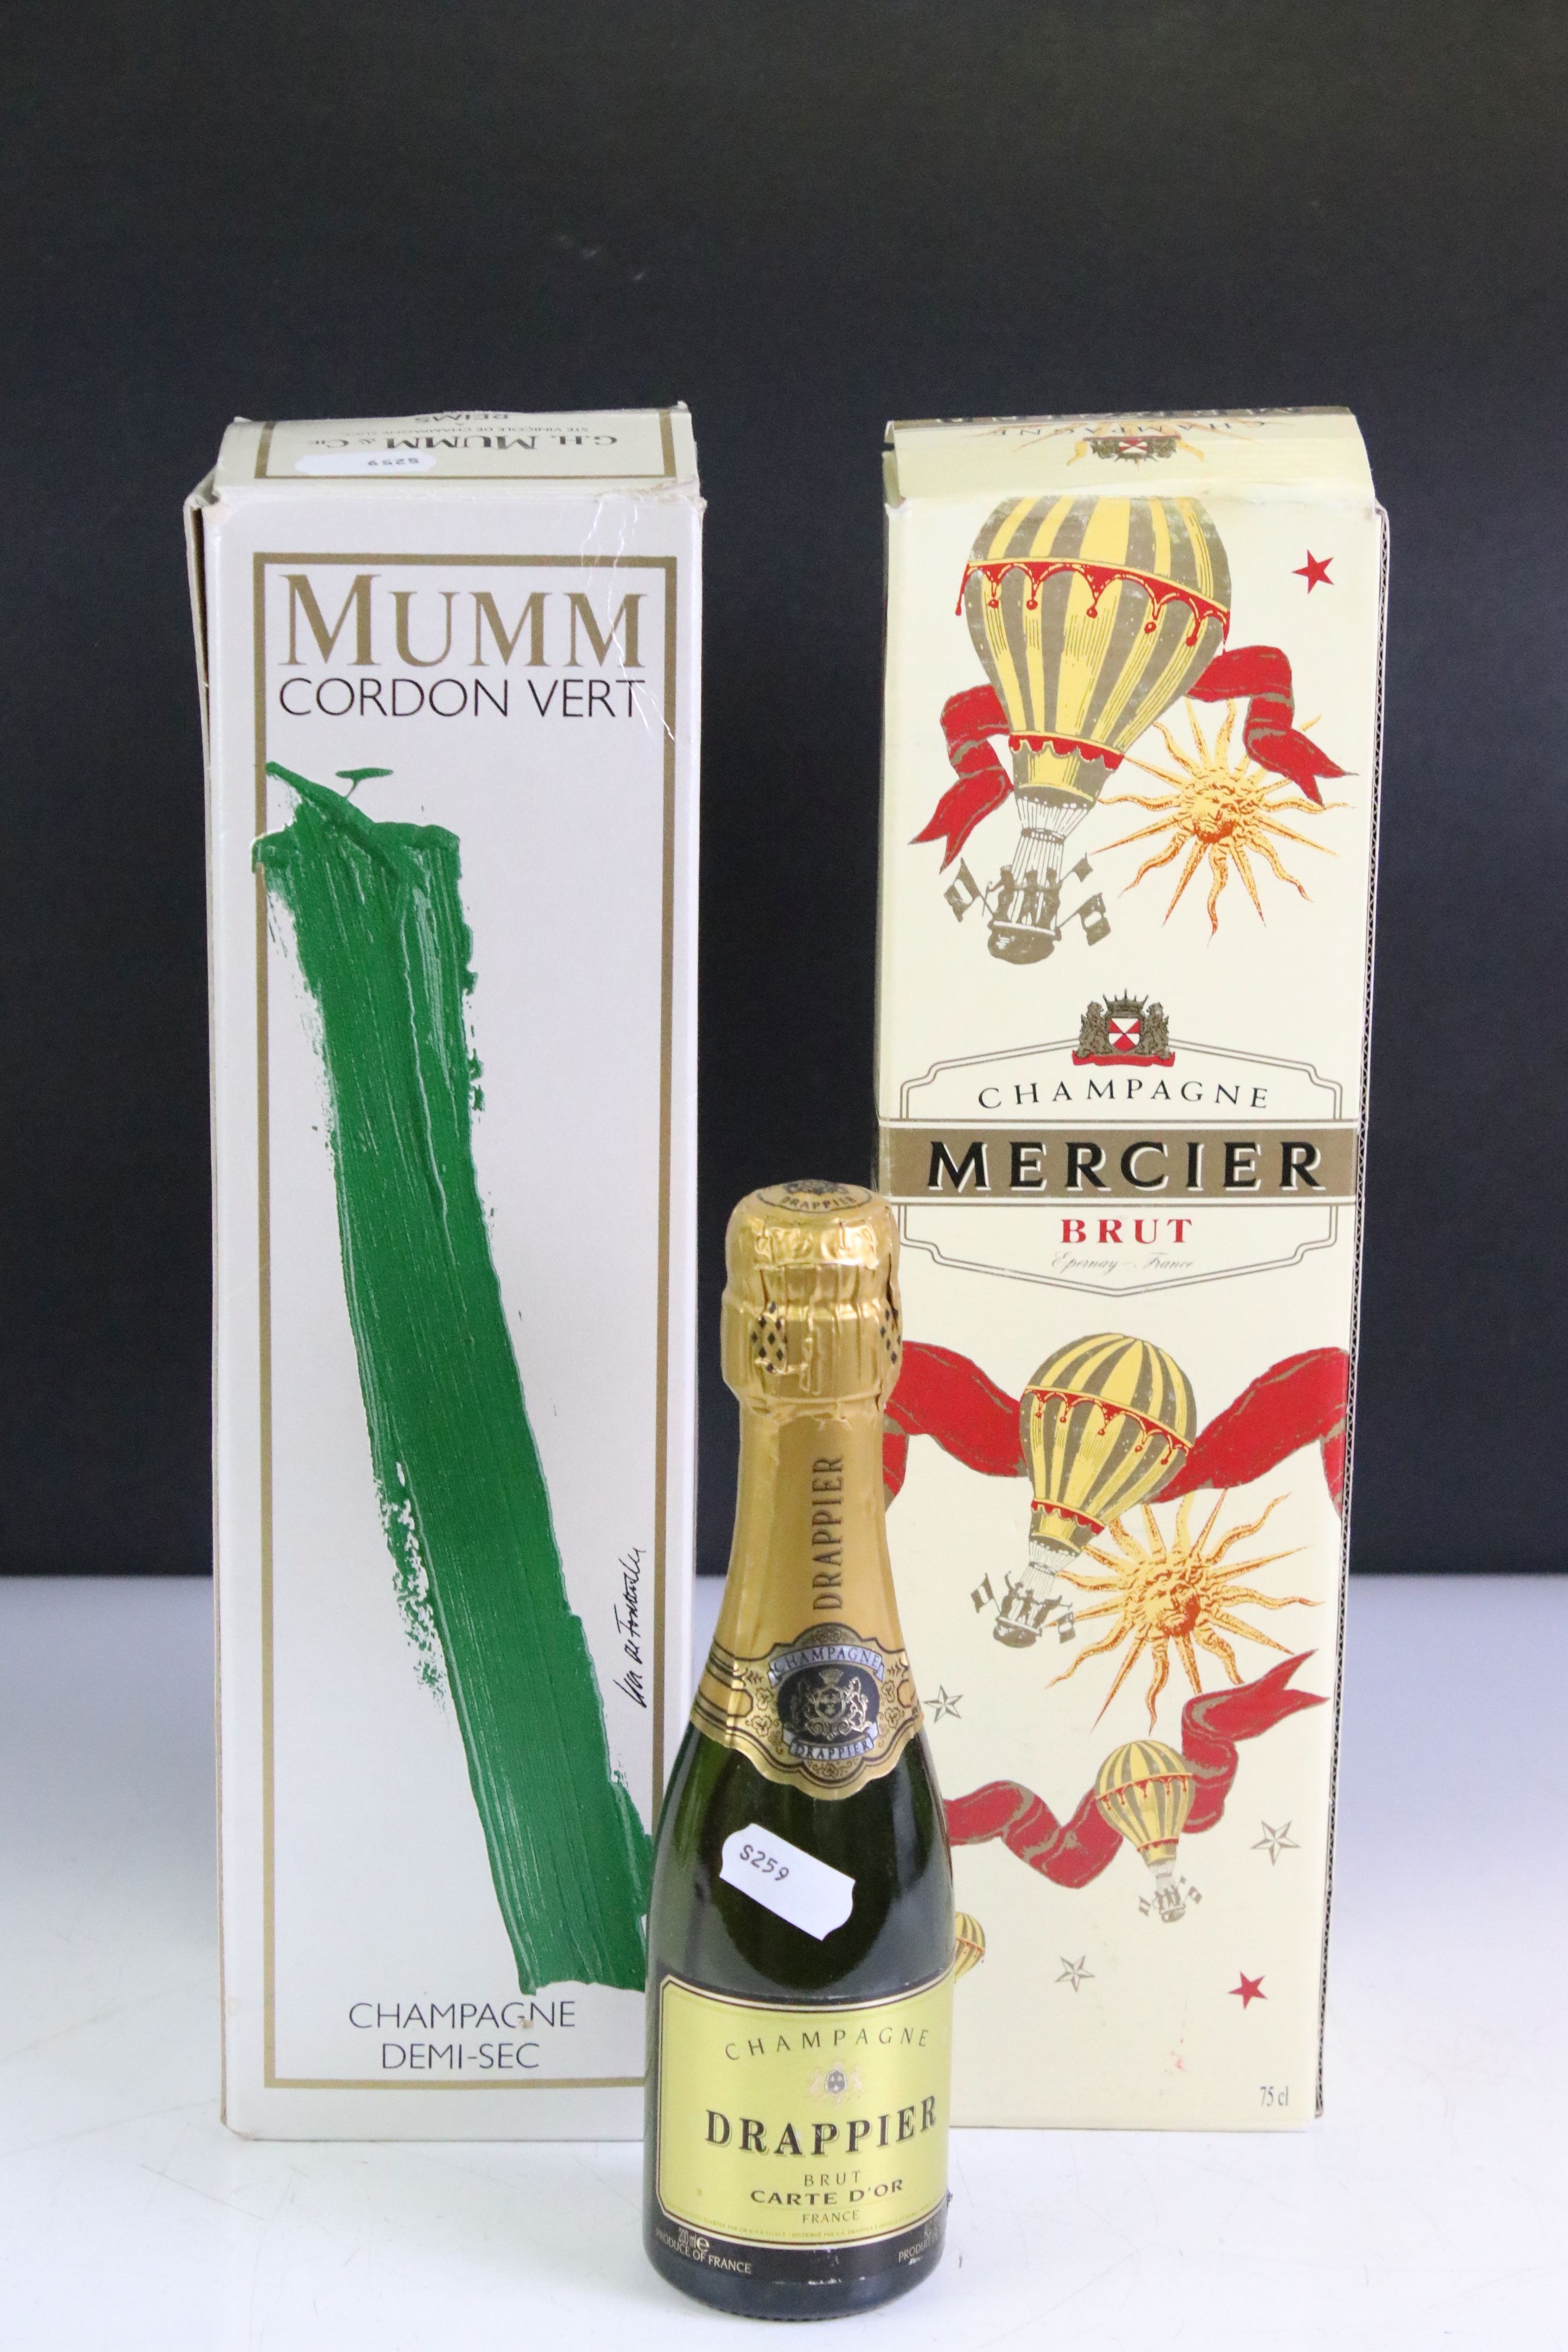 A collection of three bottles of Champagne to include Mercier Brut, Mumm Cordon Vert and Drappier